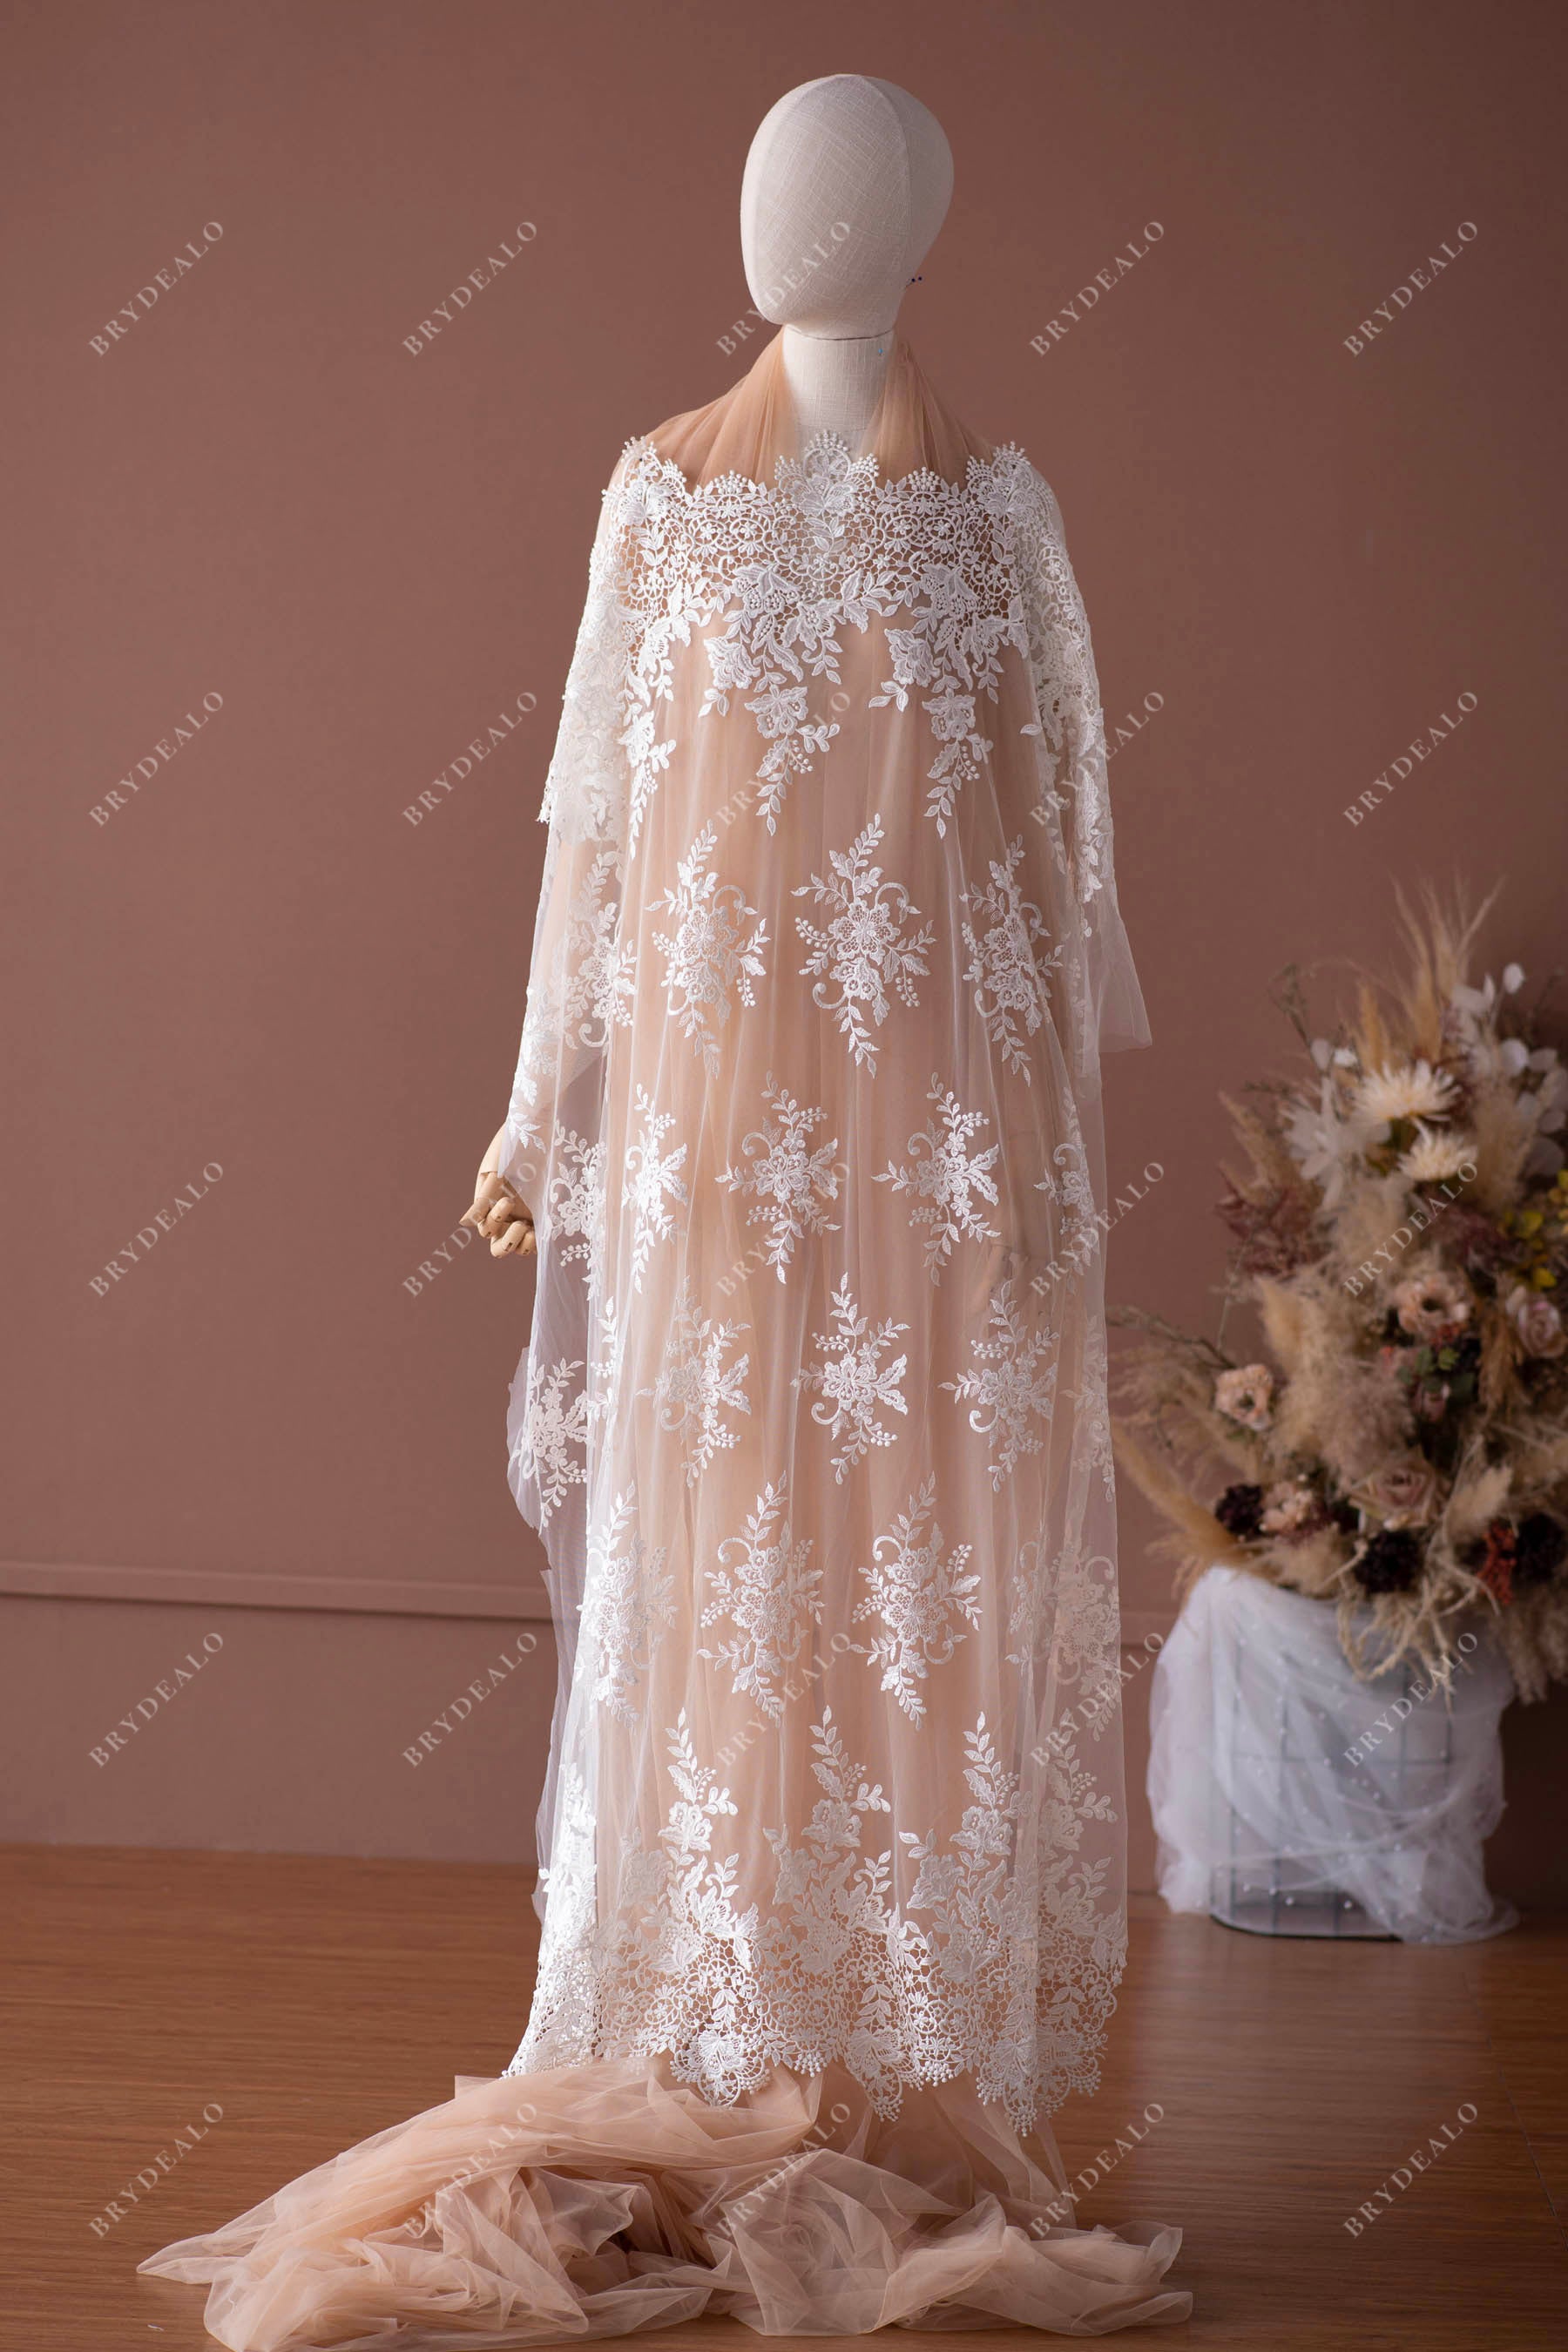 wholesale embroidery bridal lace fabric